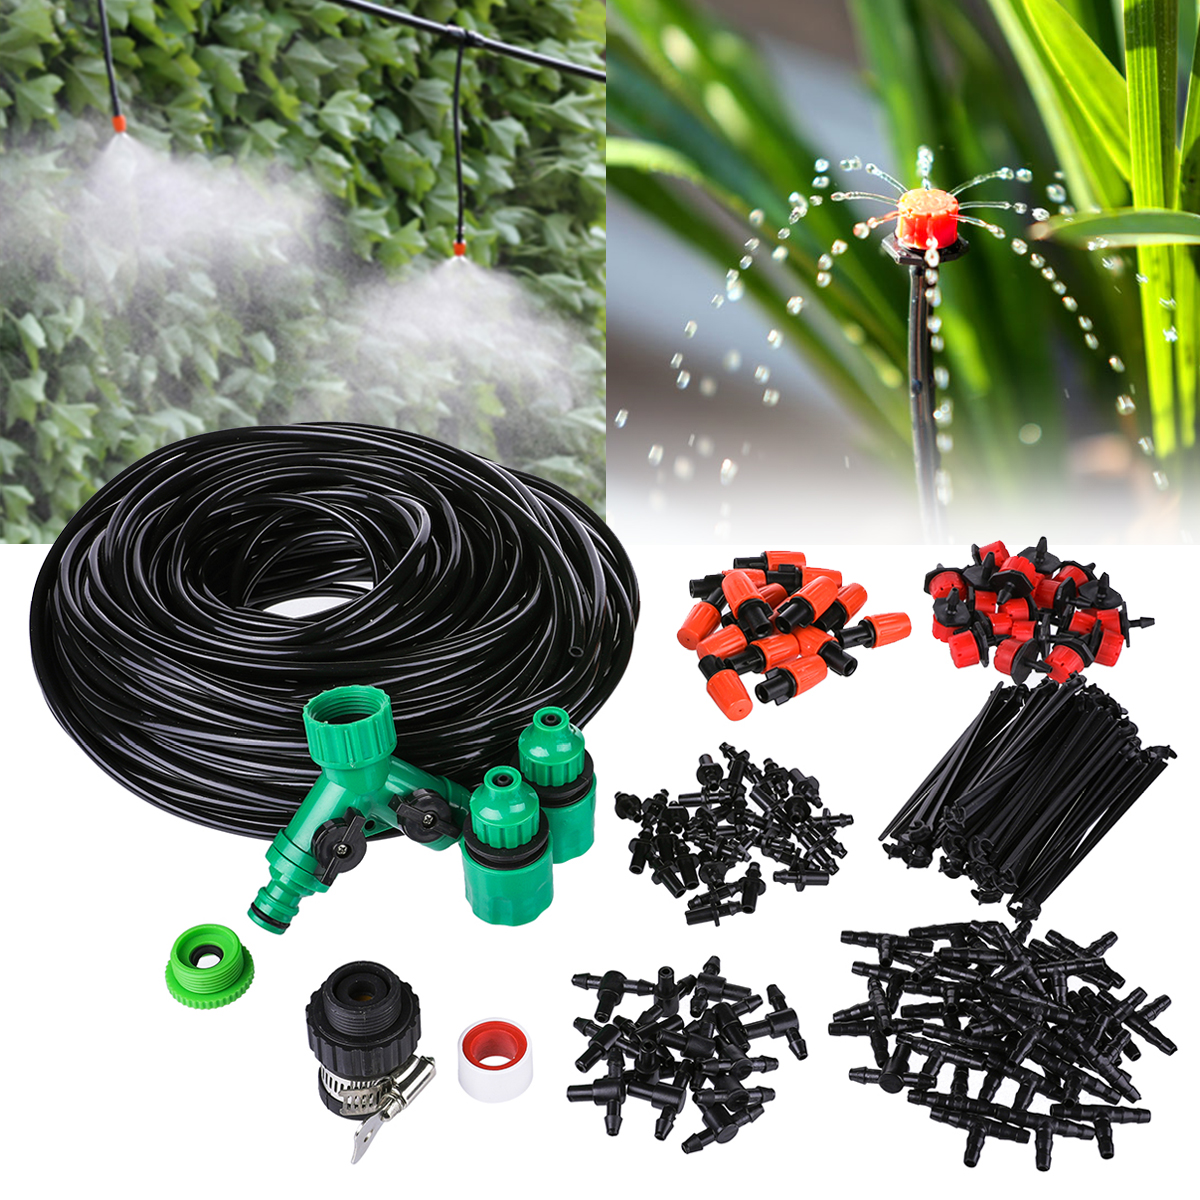 DIY-40M-Micro-Drip-Irrigation-System-Agriculture-Sprinkler-Garden-Plant-Flower-Automatic-Watering-To-1451058-1